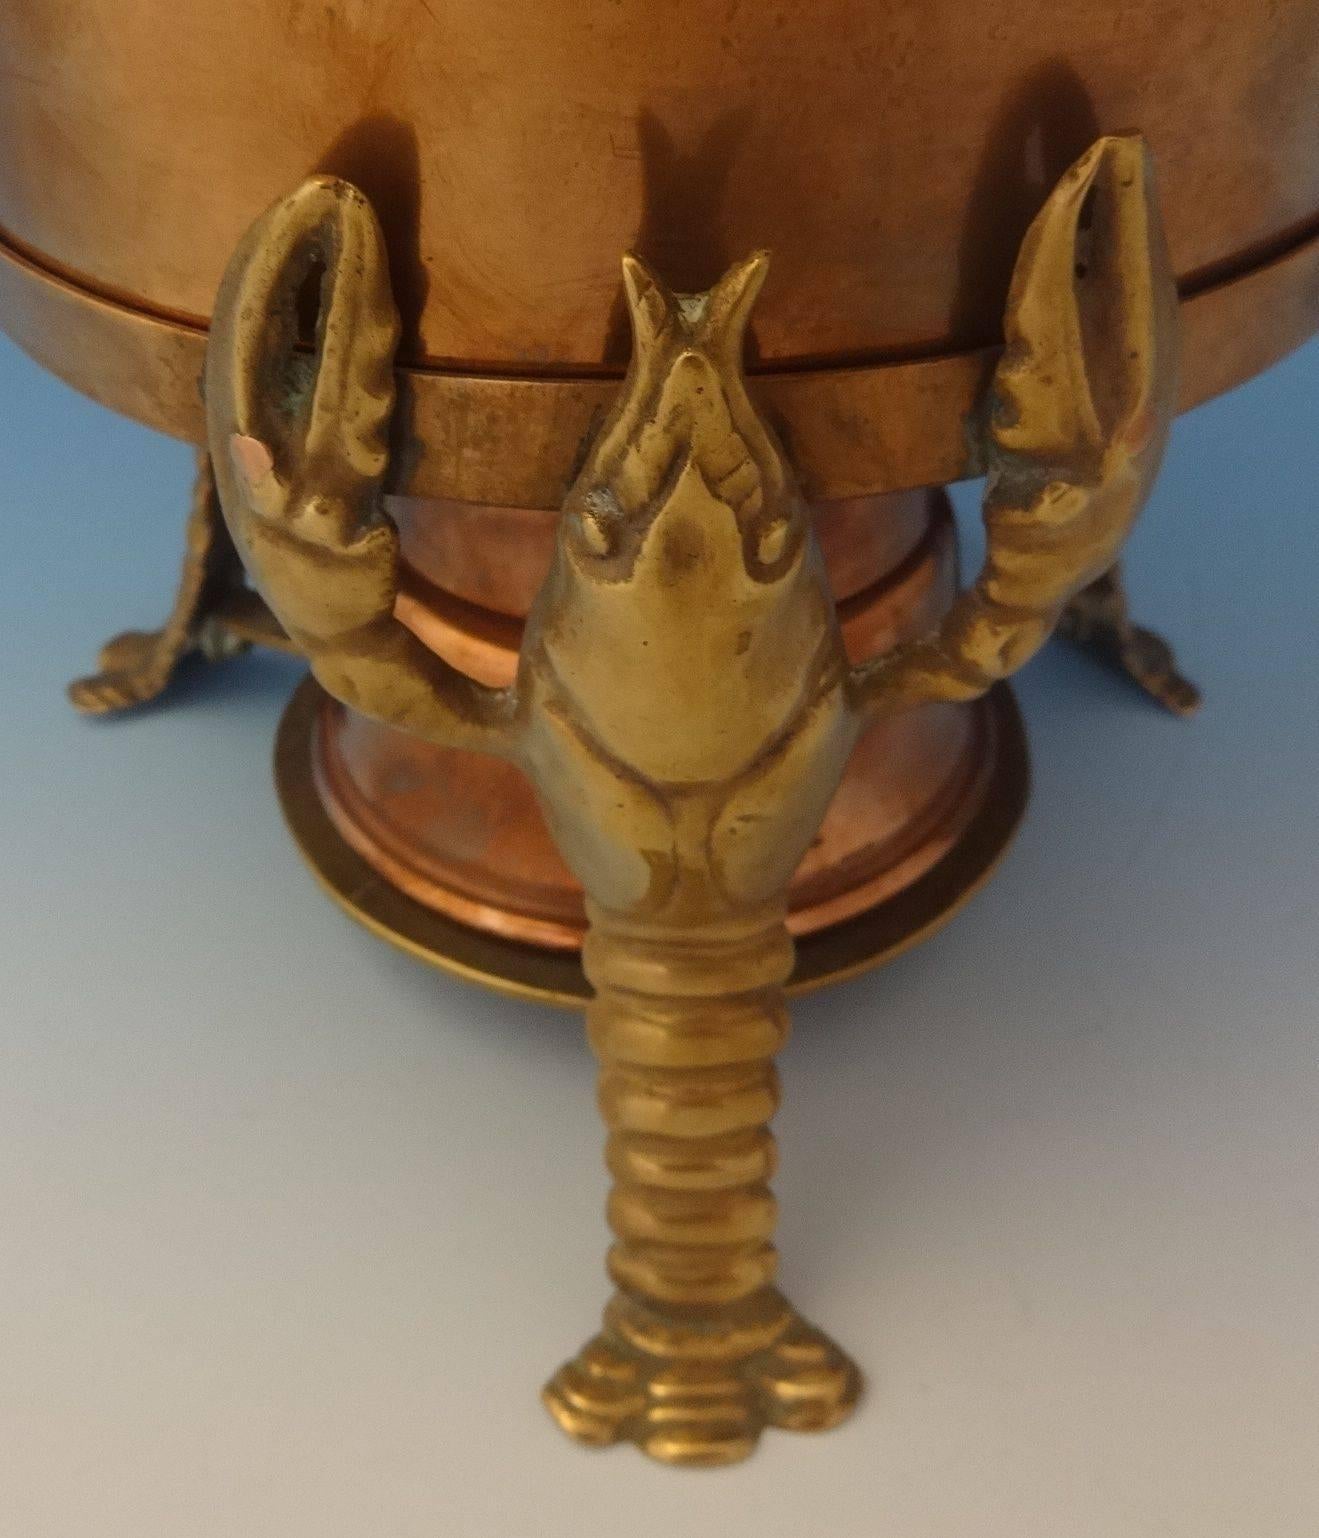 Joseph Heinrichs: This impressive copper and brass lobster pot was made by Joseph Heinrichs. The piece has 3-D lobsters and it dates from circa 1905. It is made of bronze lobsters and a copper and sterling pot. The measurements for the pot are 9